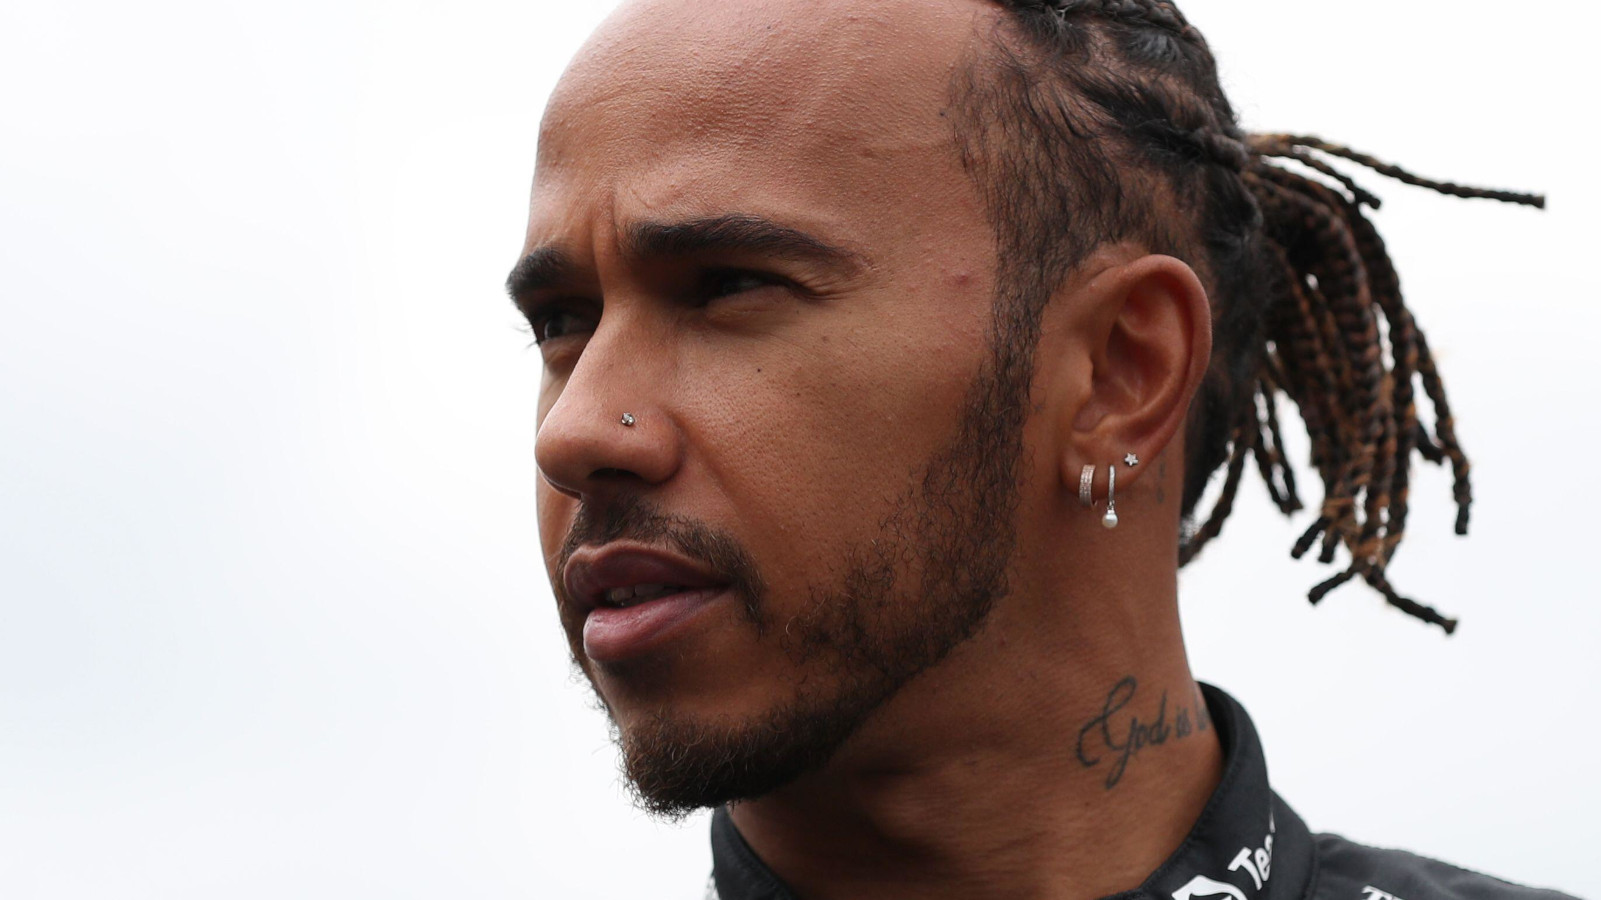 Lewis Hamilton nose stud and earrings. July 2021